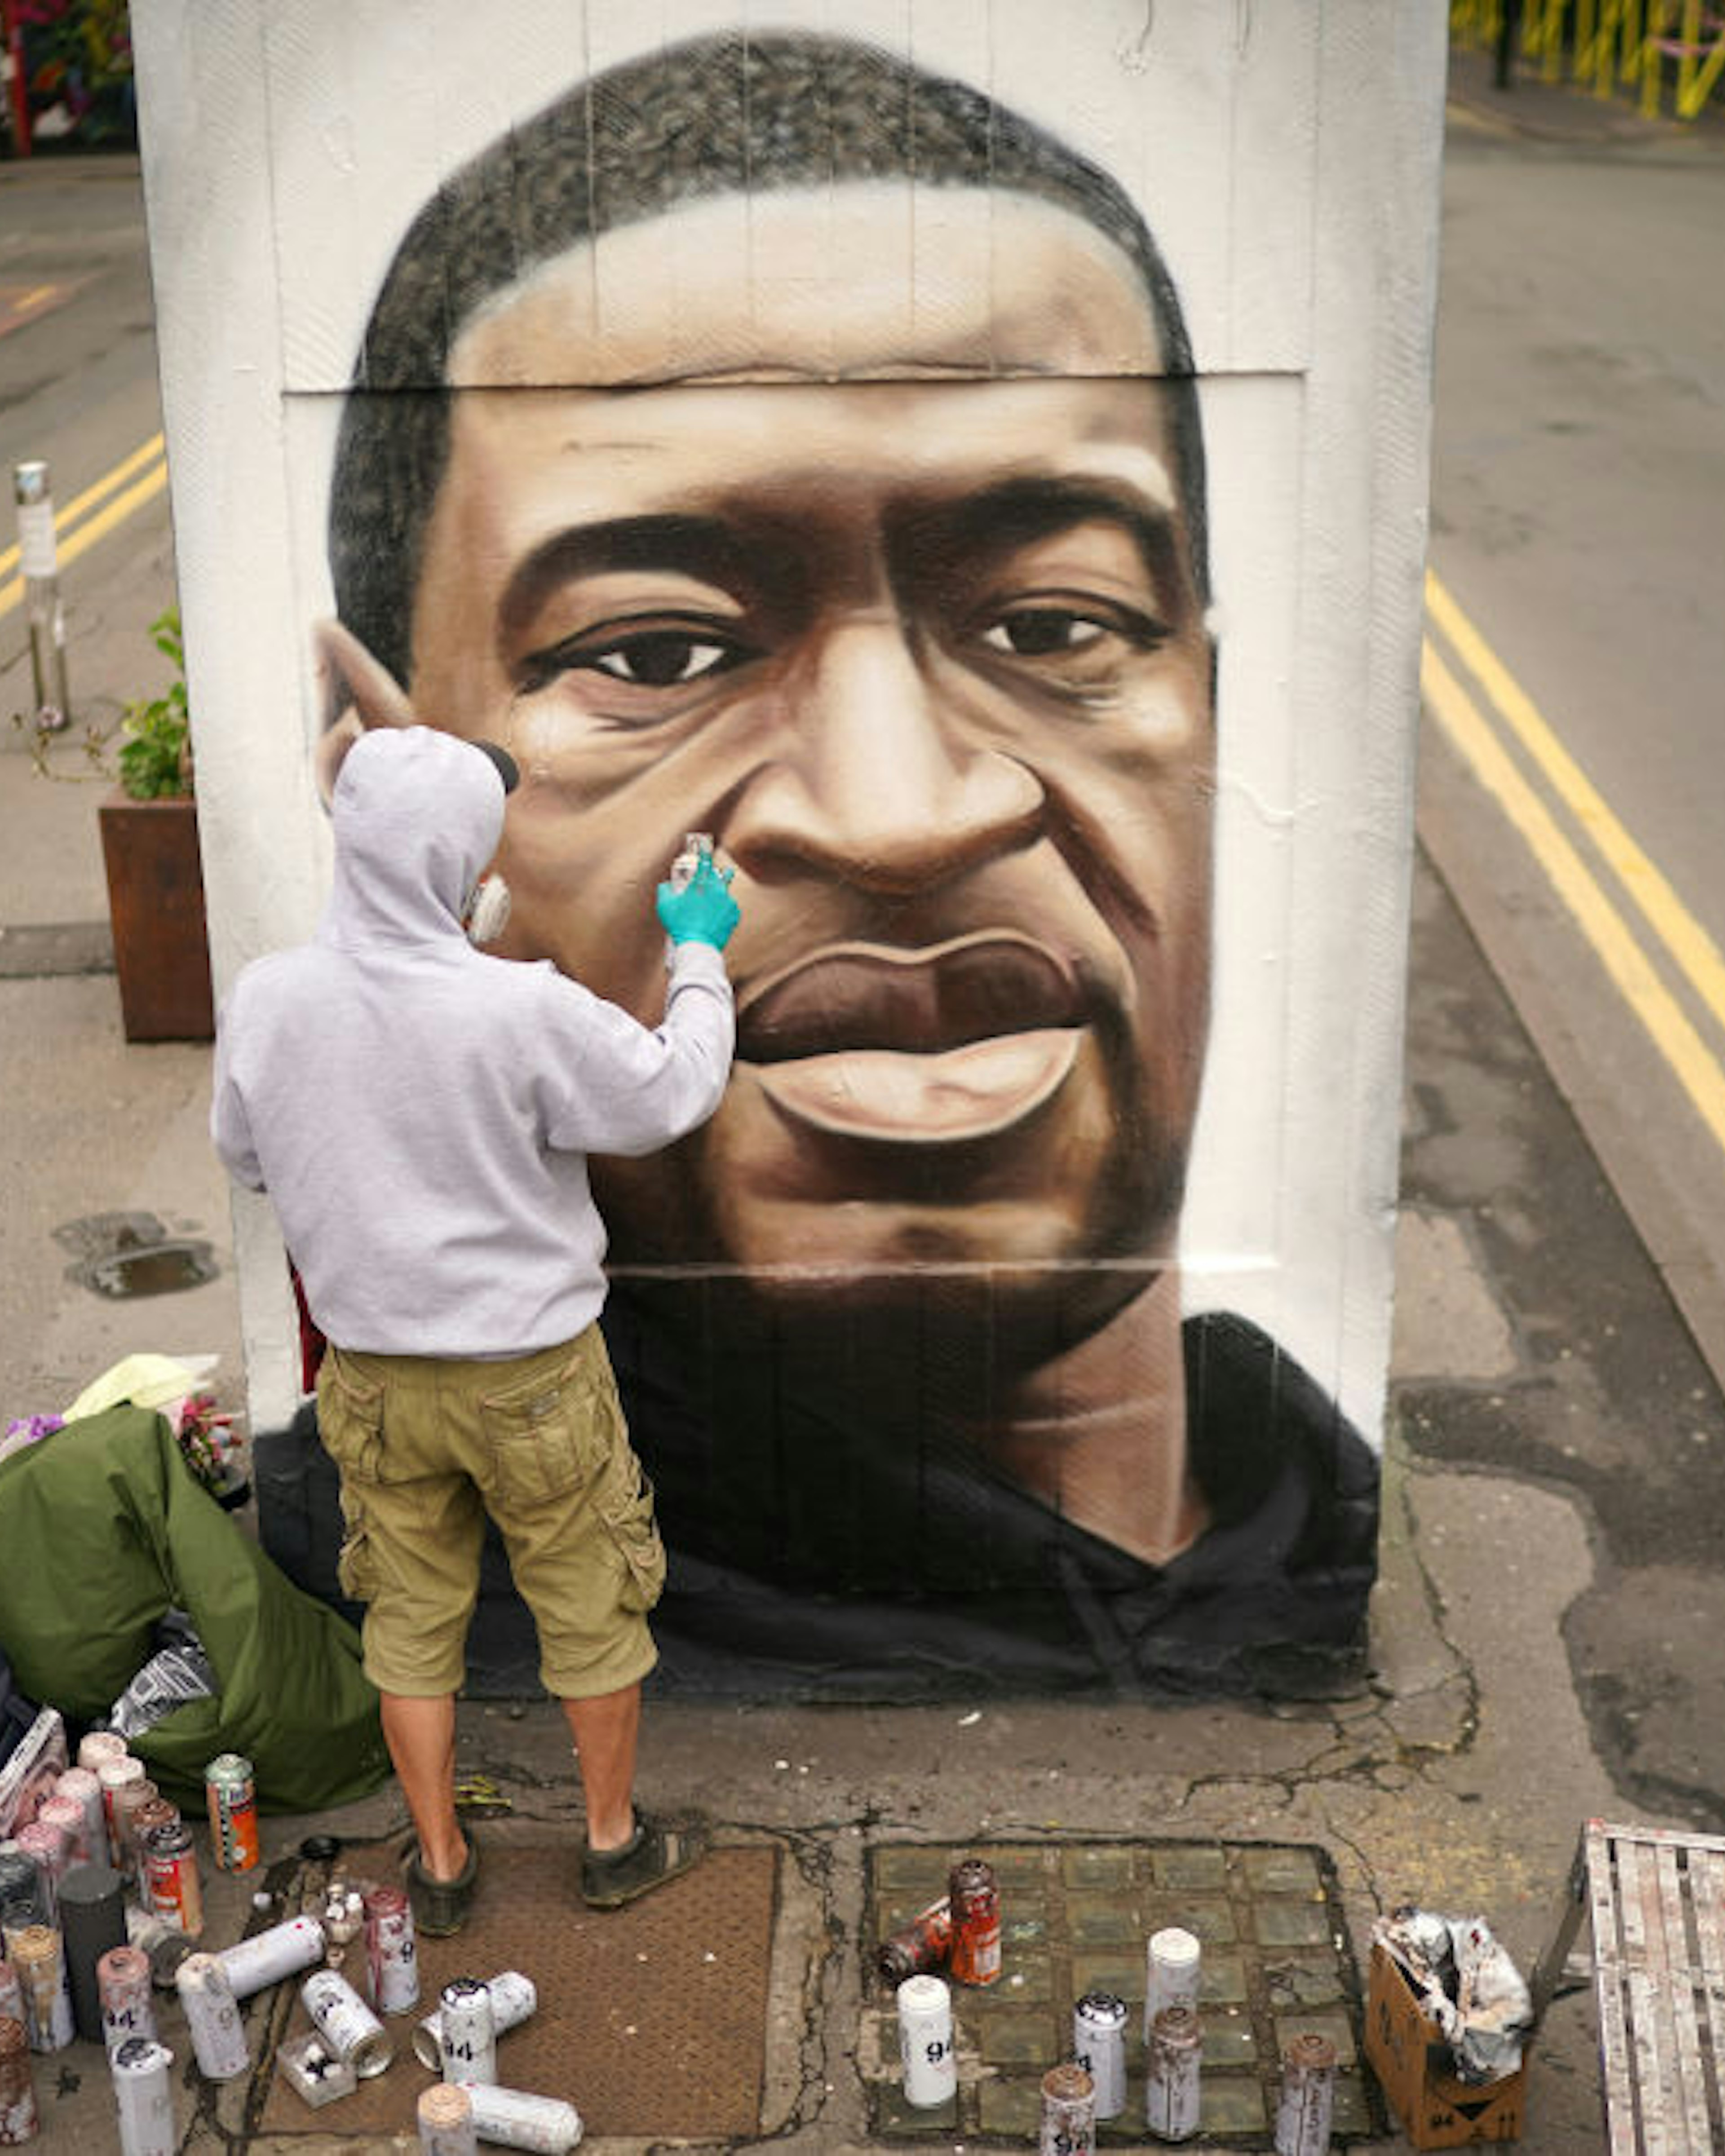 MANCHESTER, UNITED KINGDOM - JUNE 03: Graffiti artist Akse spray paints a mural of George Floyd in Manchester's northern quarter on June 03, 2020 in Manchester, United Kingdom. The death of an African-American man, George Floyd, while in the custody of Minneapolis police has sparked protests across the United States, as well as demonstrations of solidarity in many countries around the world. (Photo by Christopher Furlong/Getty Images)